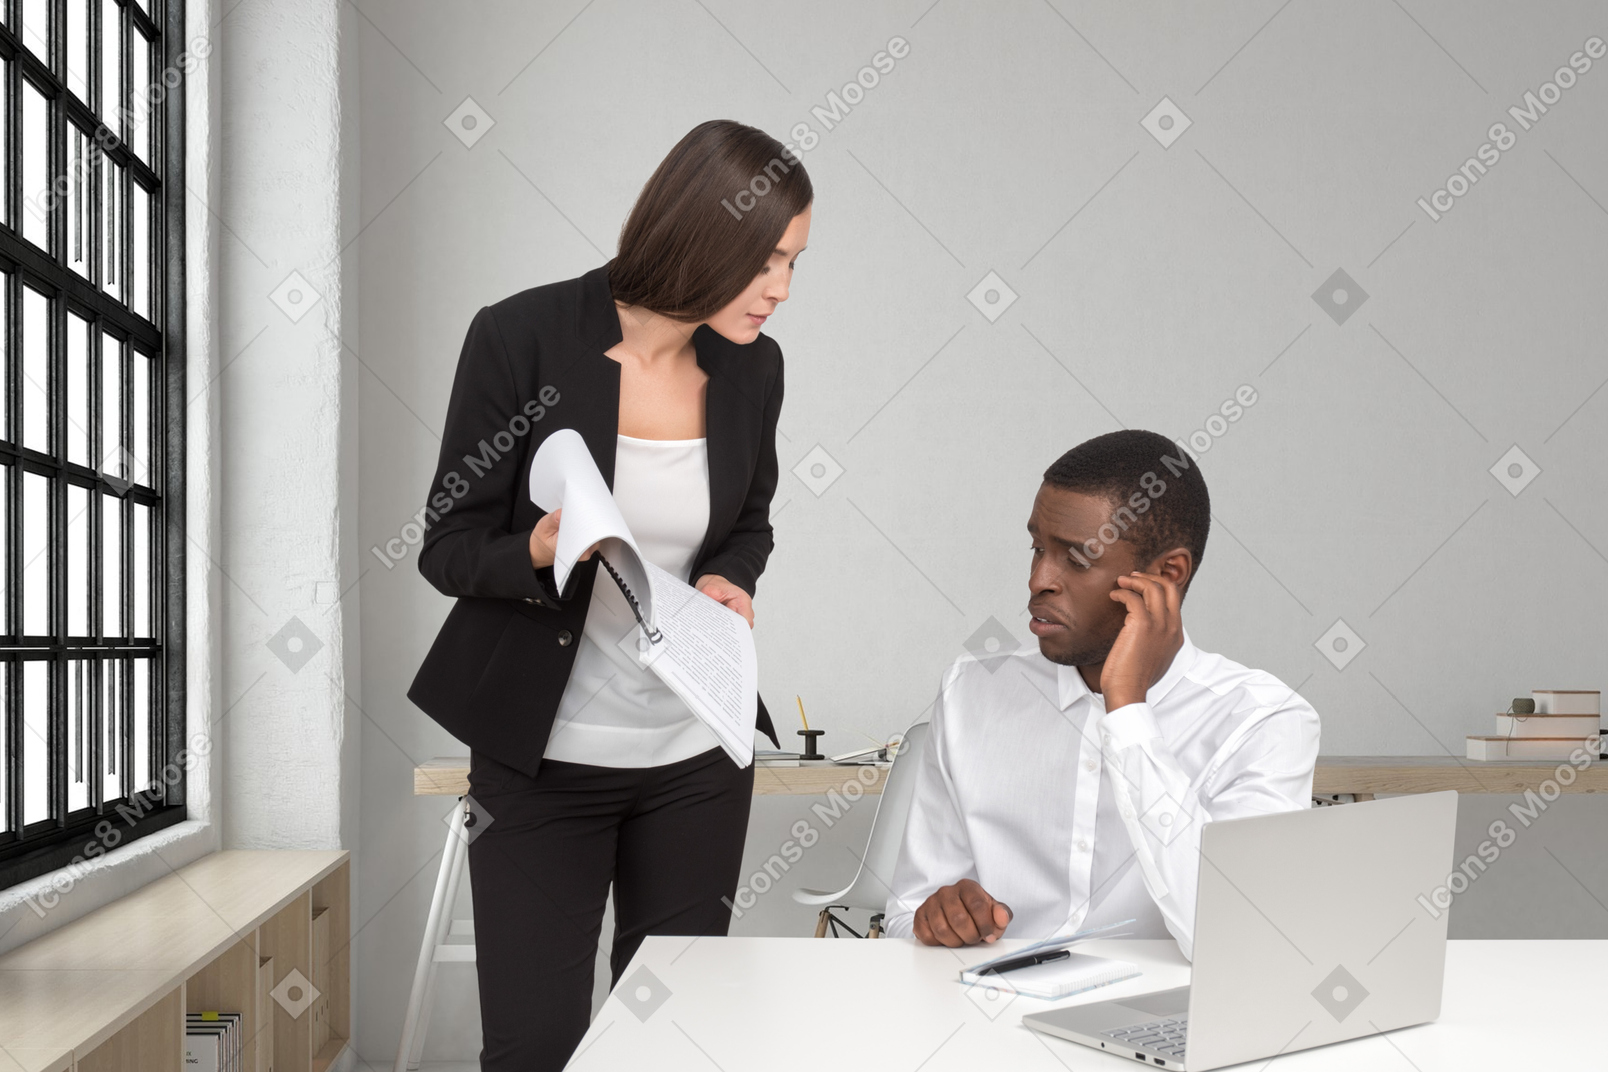 Female boss asking puzzled employee about report